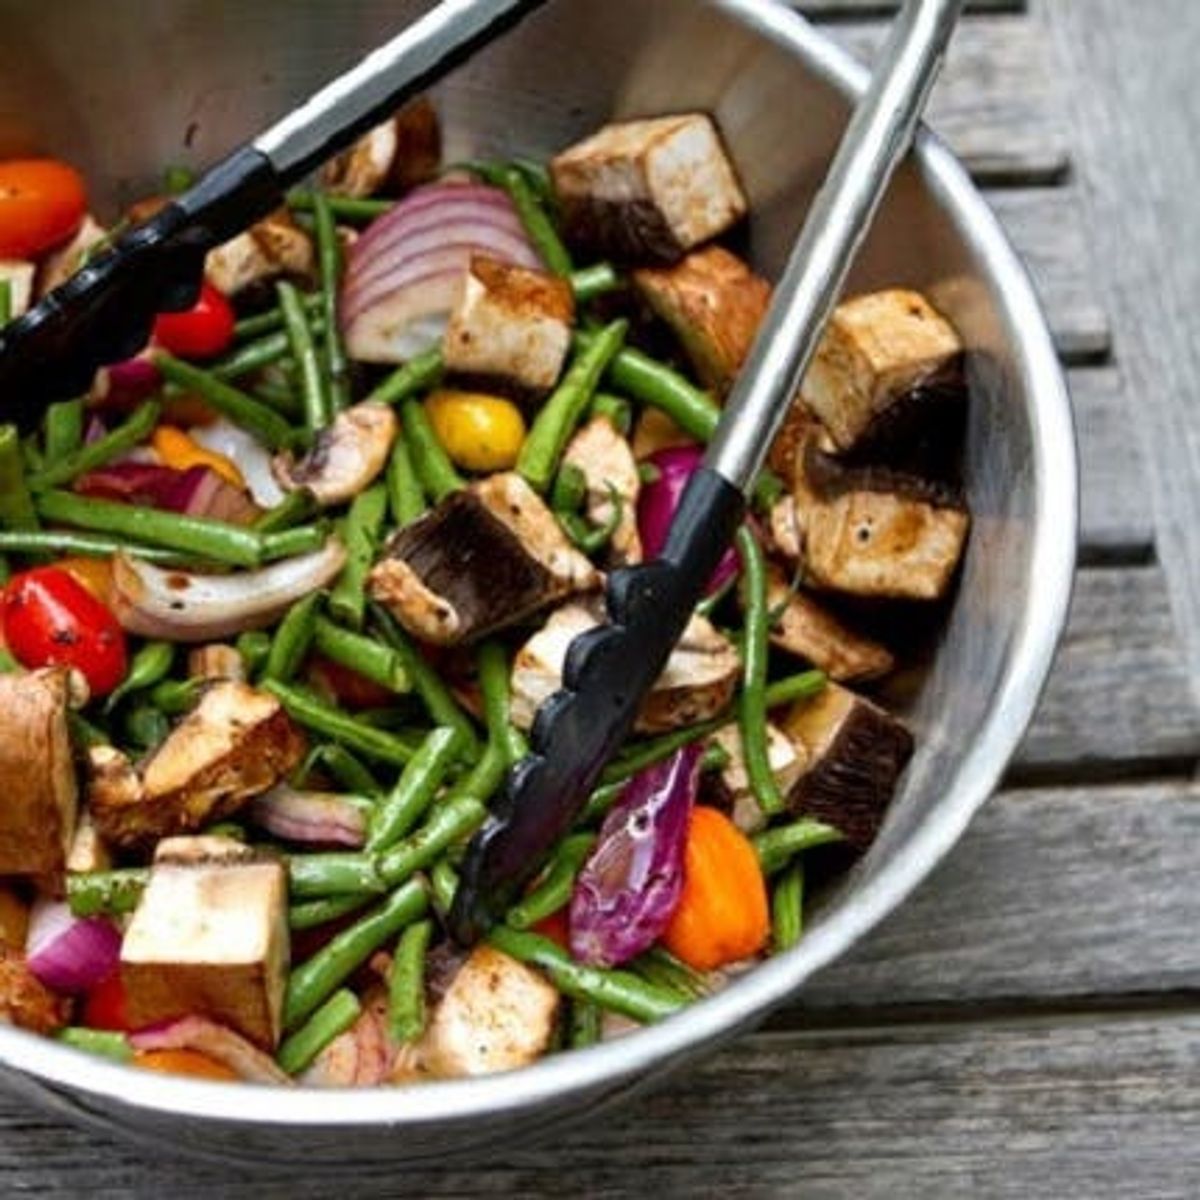 15 Healthy Camping Recipes That Don’t Sacrifice Flavor